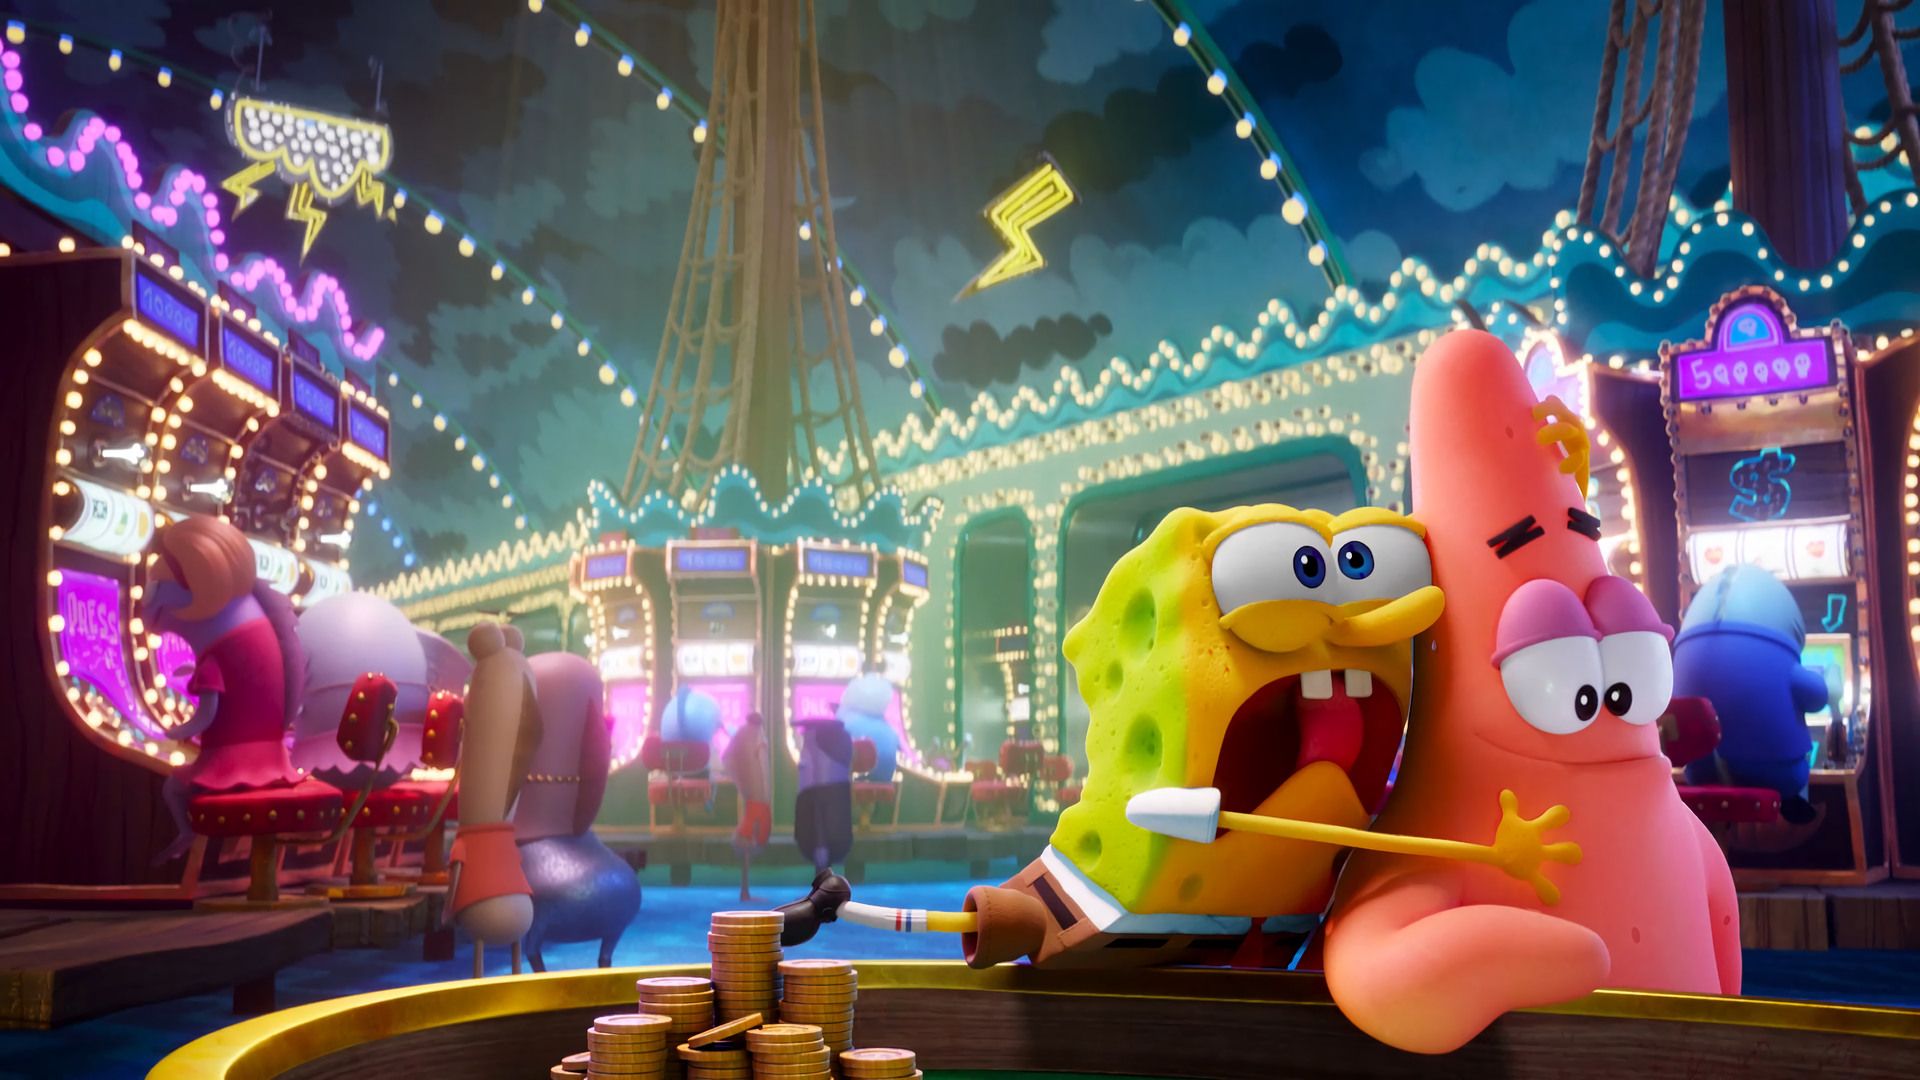 Everything We Know About The SpongeBob Movie: Sponge on the Run So